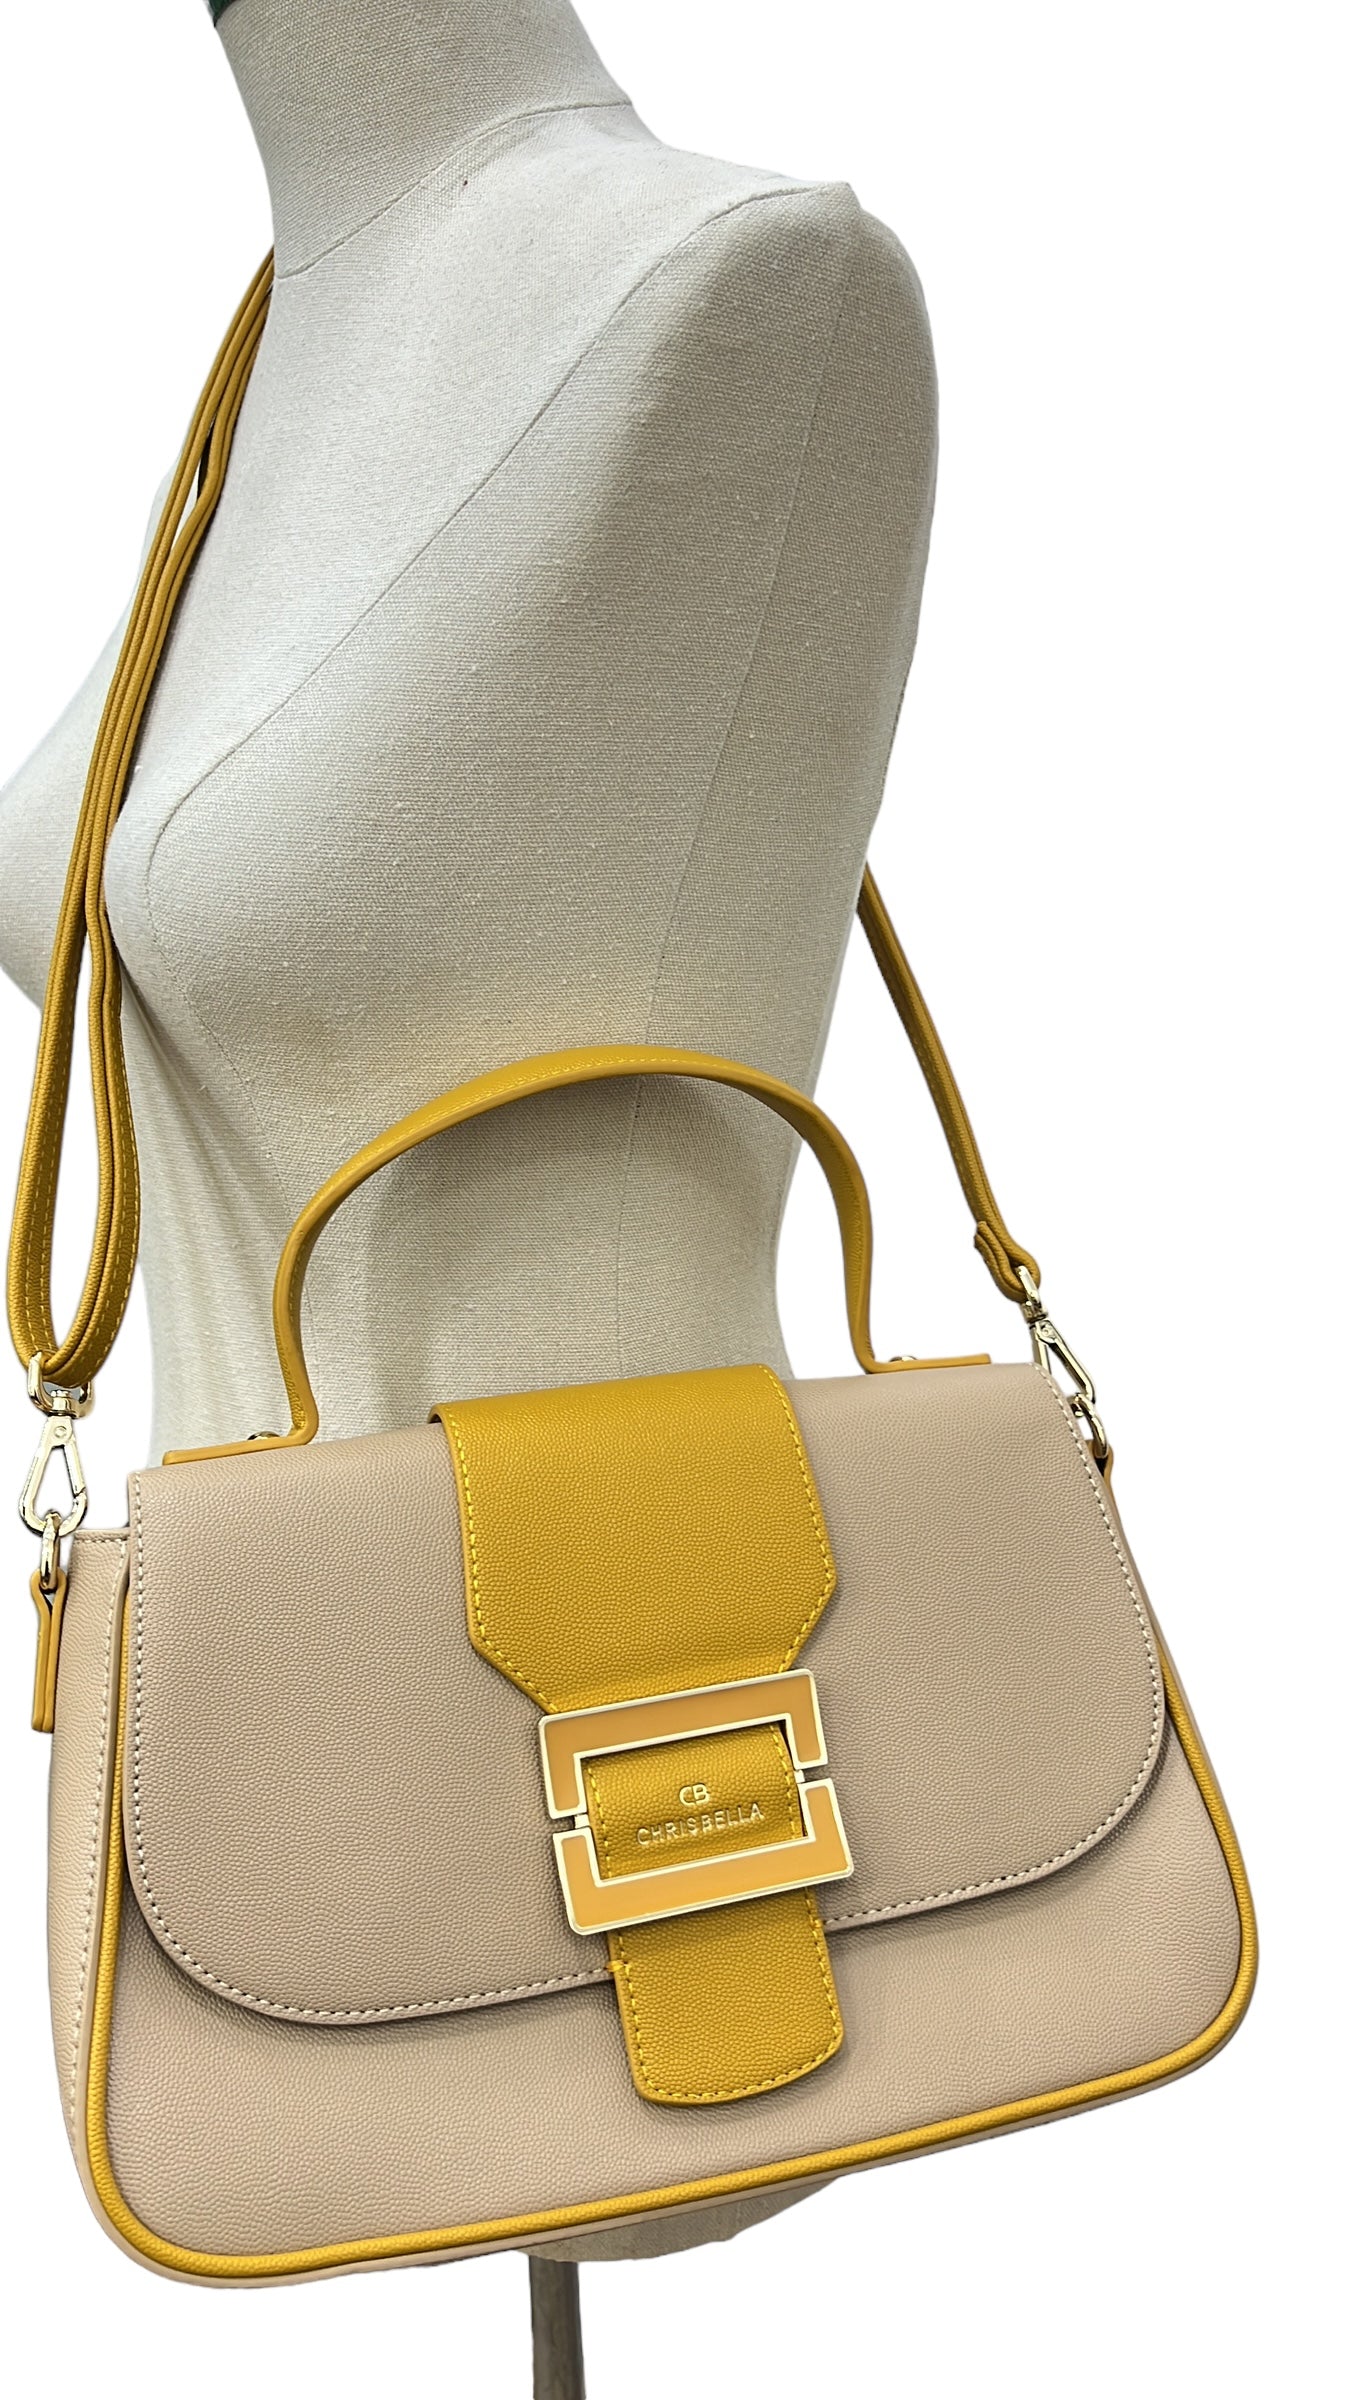 CHRISBELLA TEXTURED BUCKLE DETAIL TWO-TONE BAG IN BEIGE